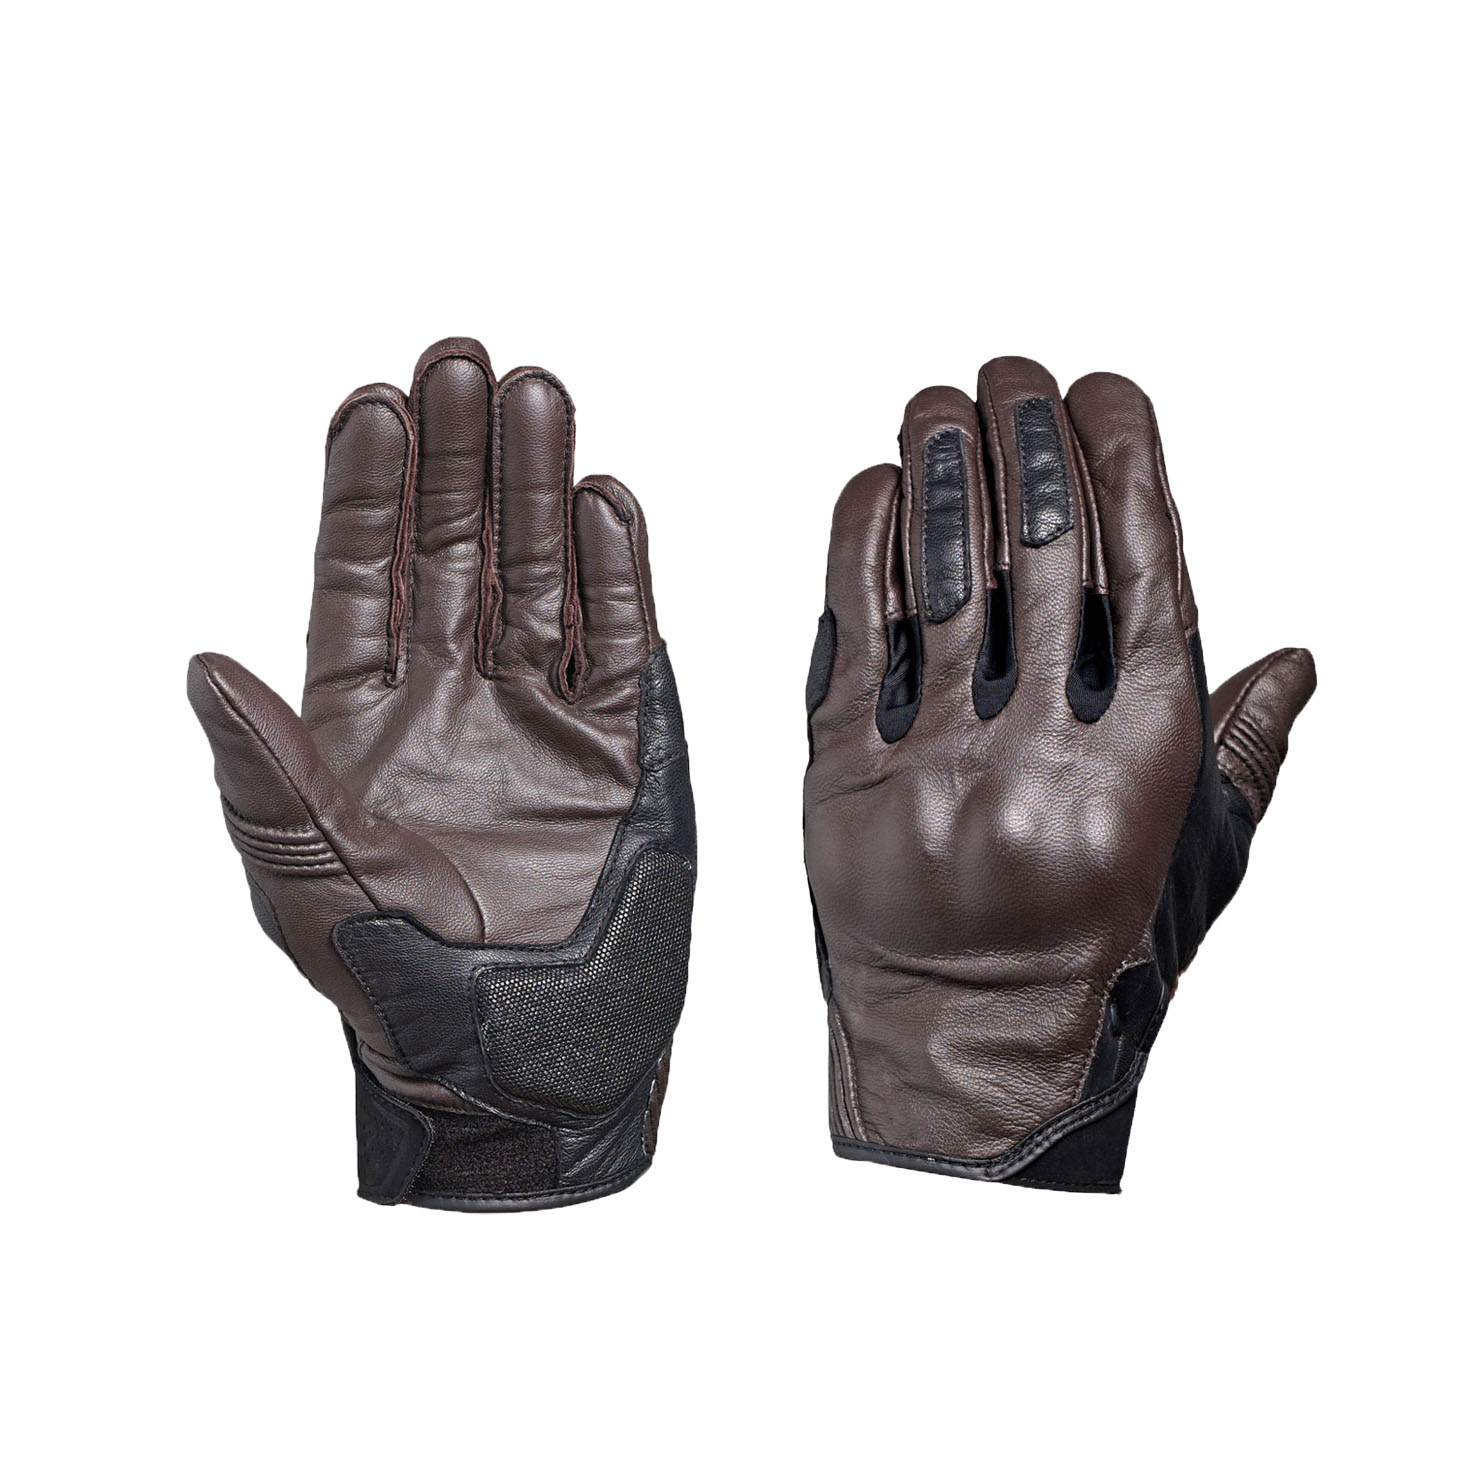 Sport Motorcycle Rider Gloves Dirt Bikes Motorcycle Leather protection Gloves Brown